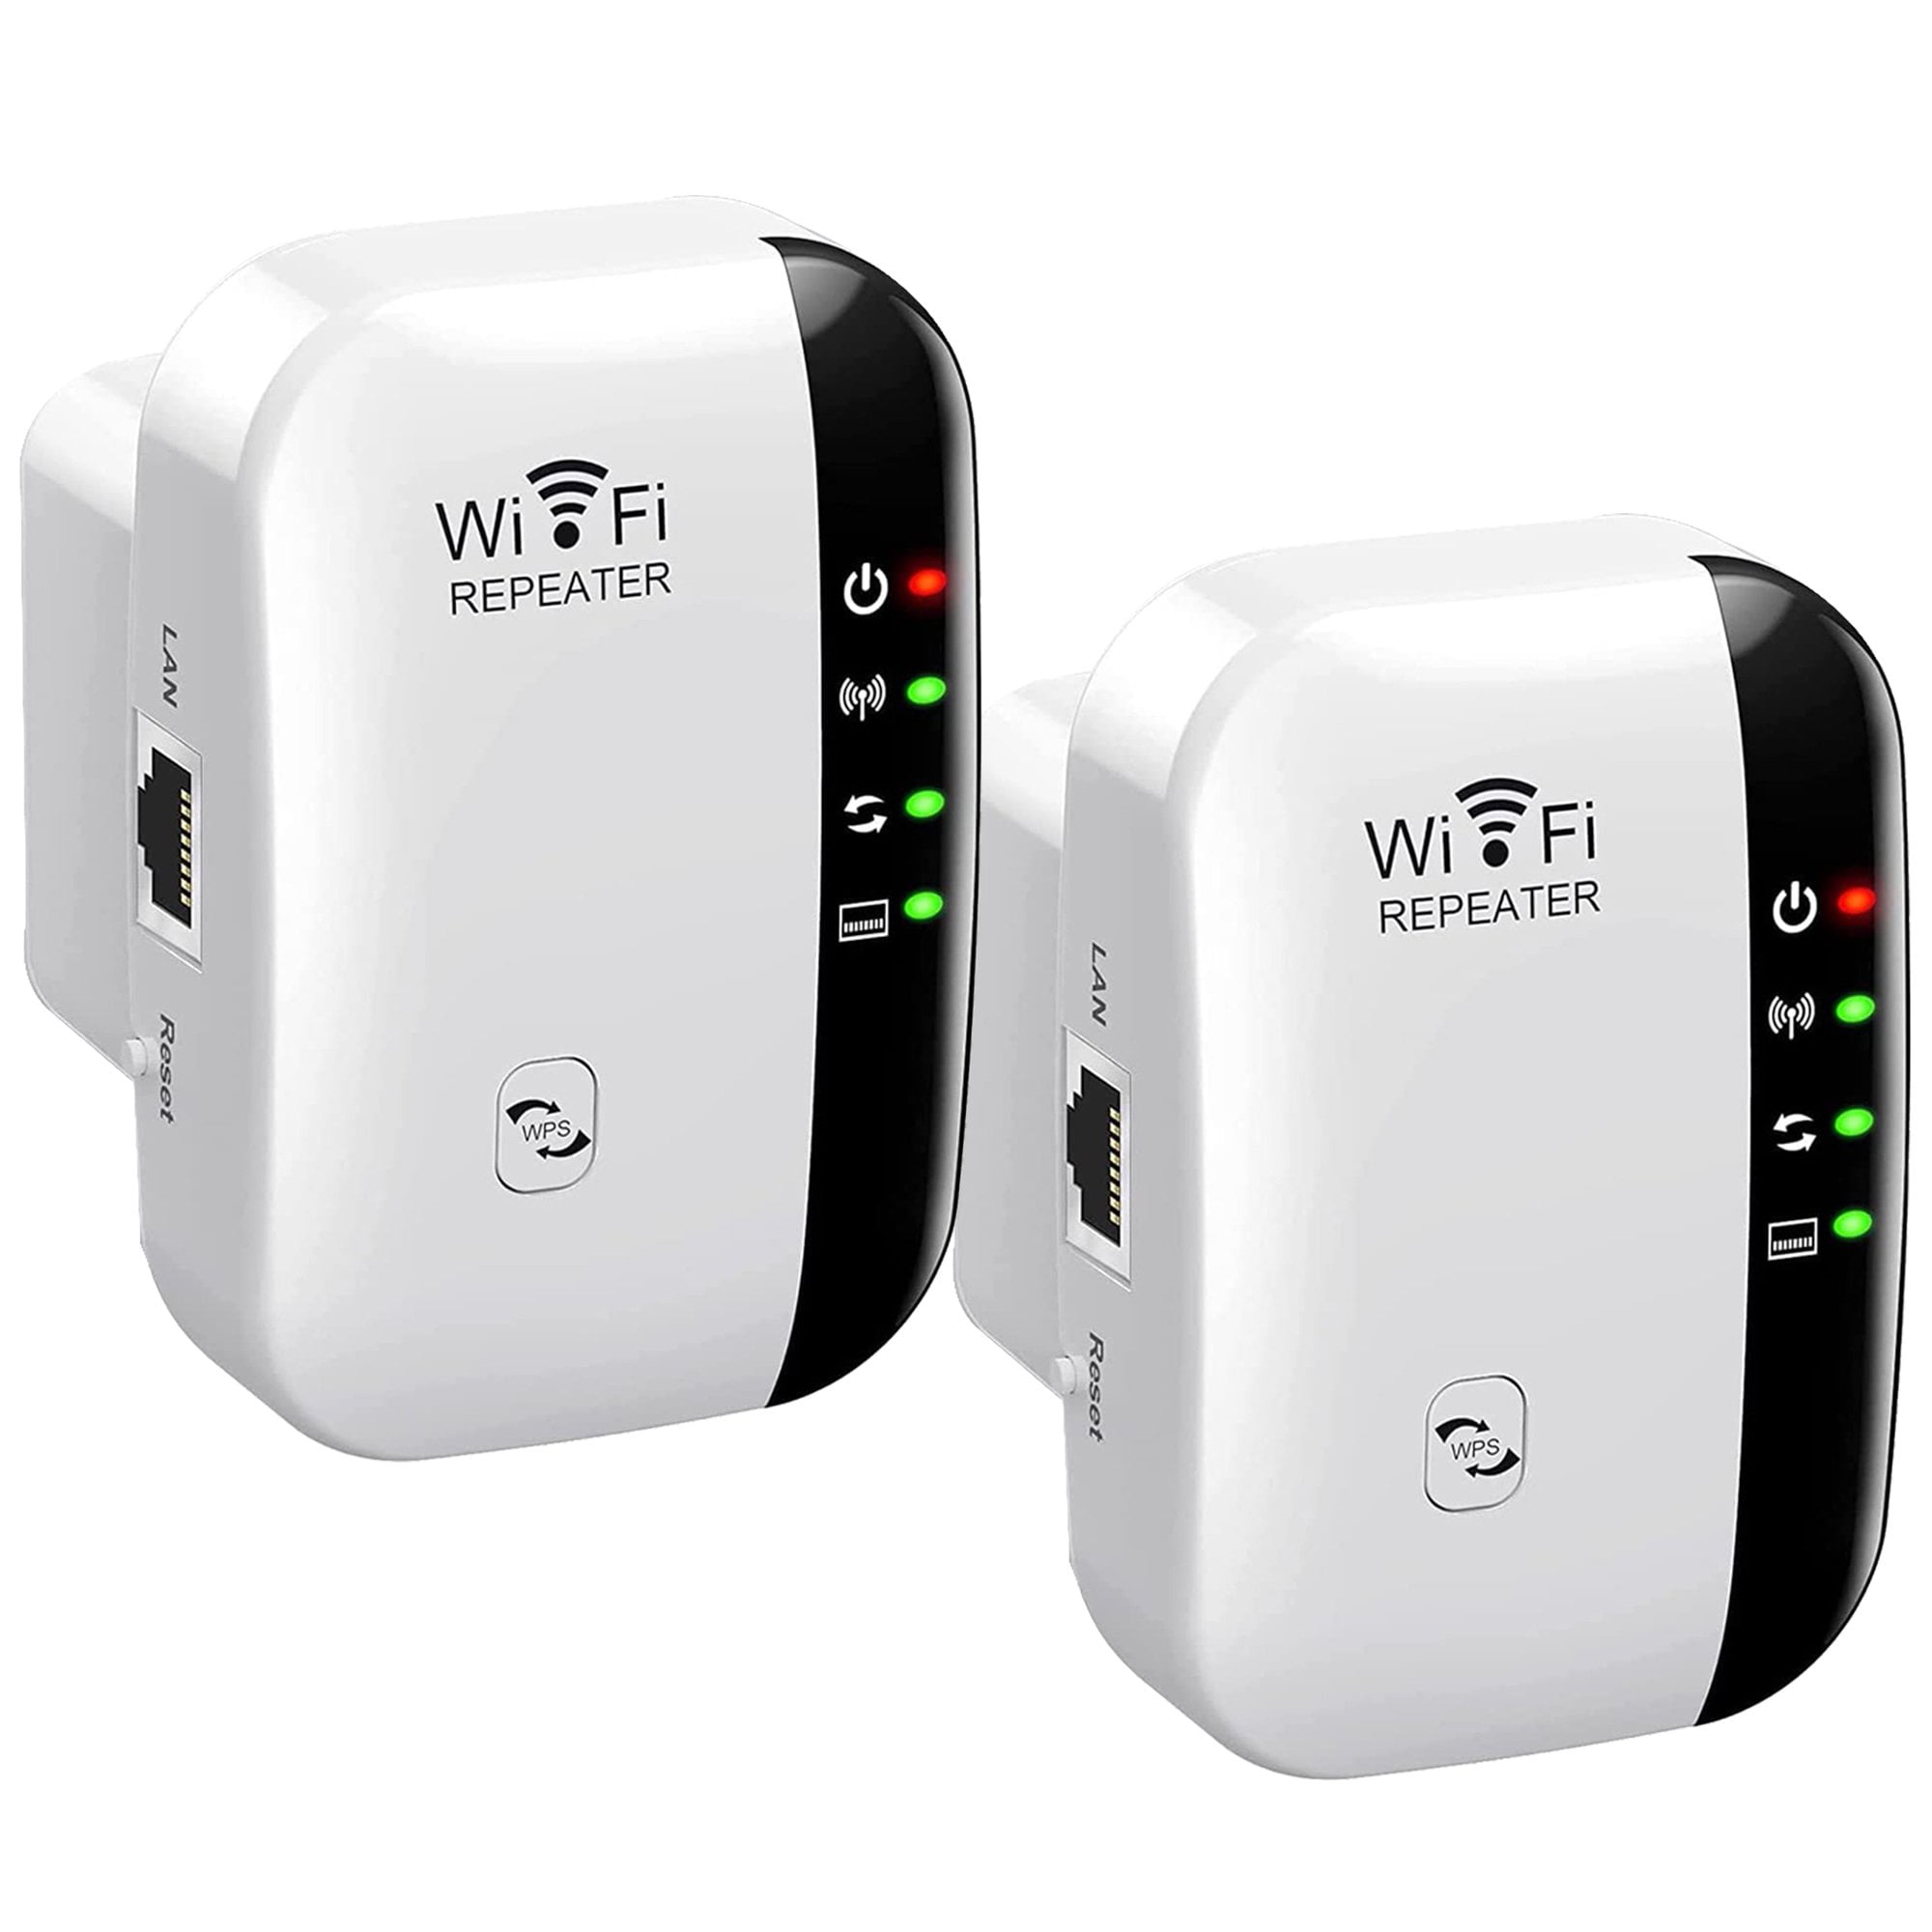 2 Pack WiFi Extender, Signal Booster Up to 2640sq.ft and Devices, Wireless Internet WiFi Range Extender, Long Range Amplifier with Ethernet Port, 1-Tap Setup, Access Point - Walmart.com